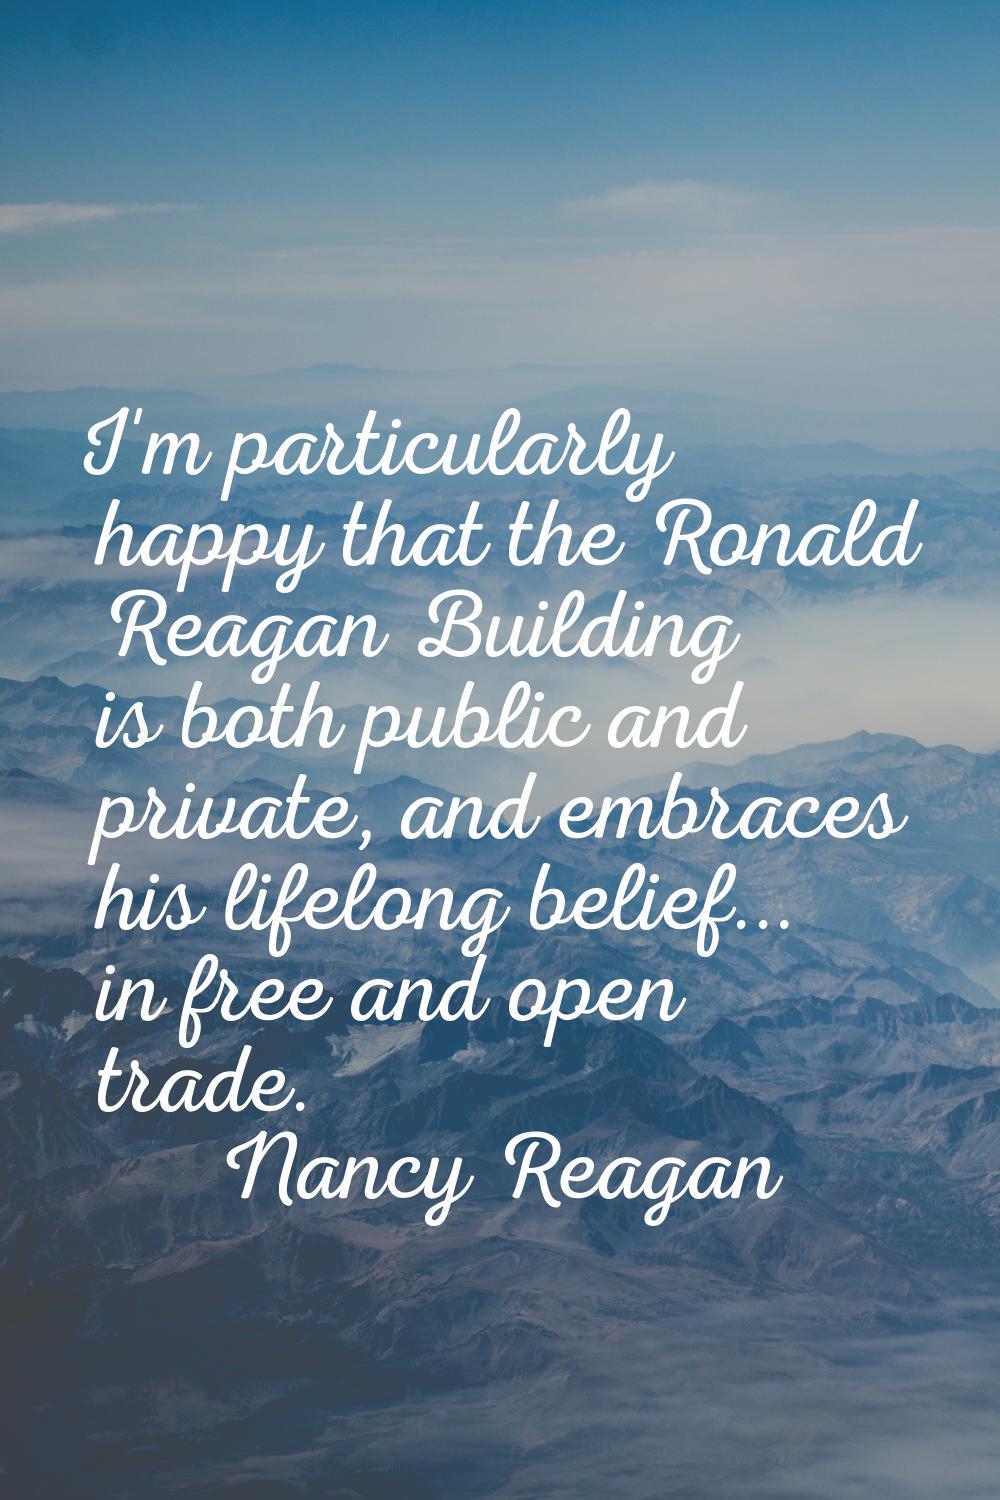 I'm particularly happy that the Ronald Reagan Building is both public and private, and embraces his